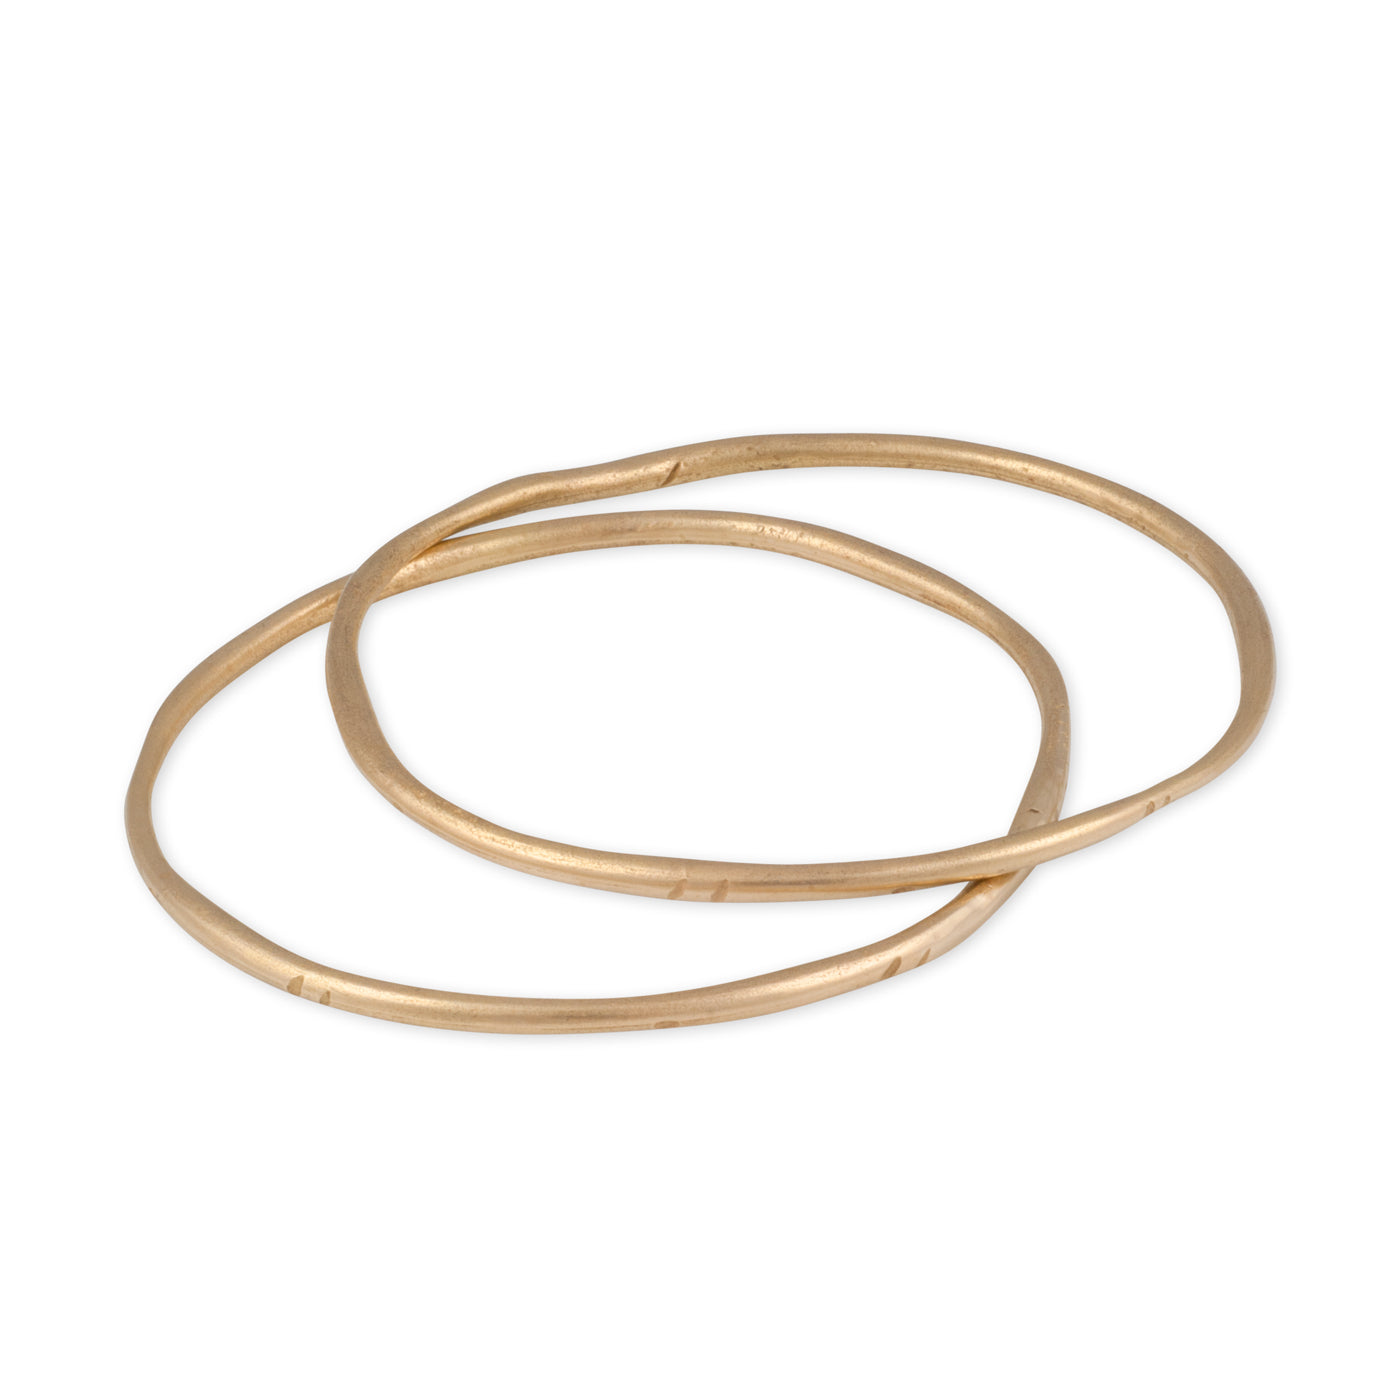 A made in America simple stacking bangle